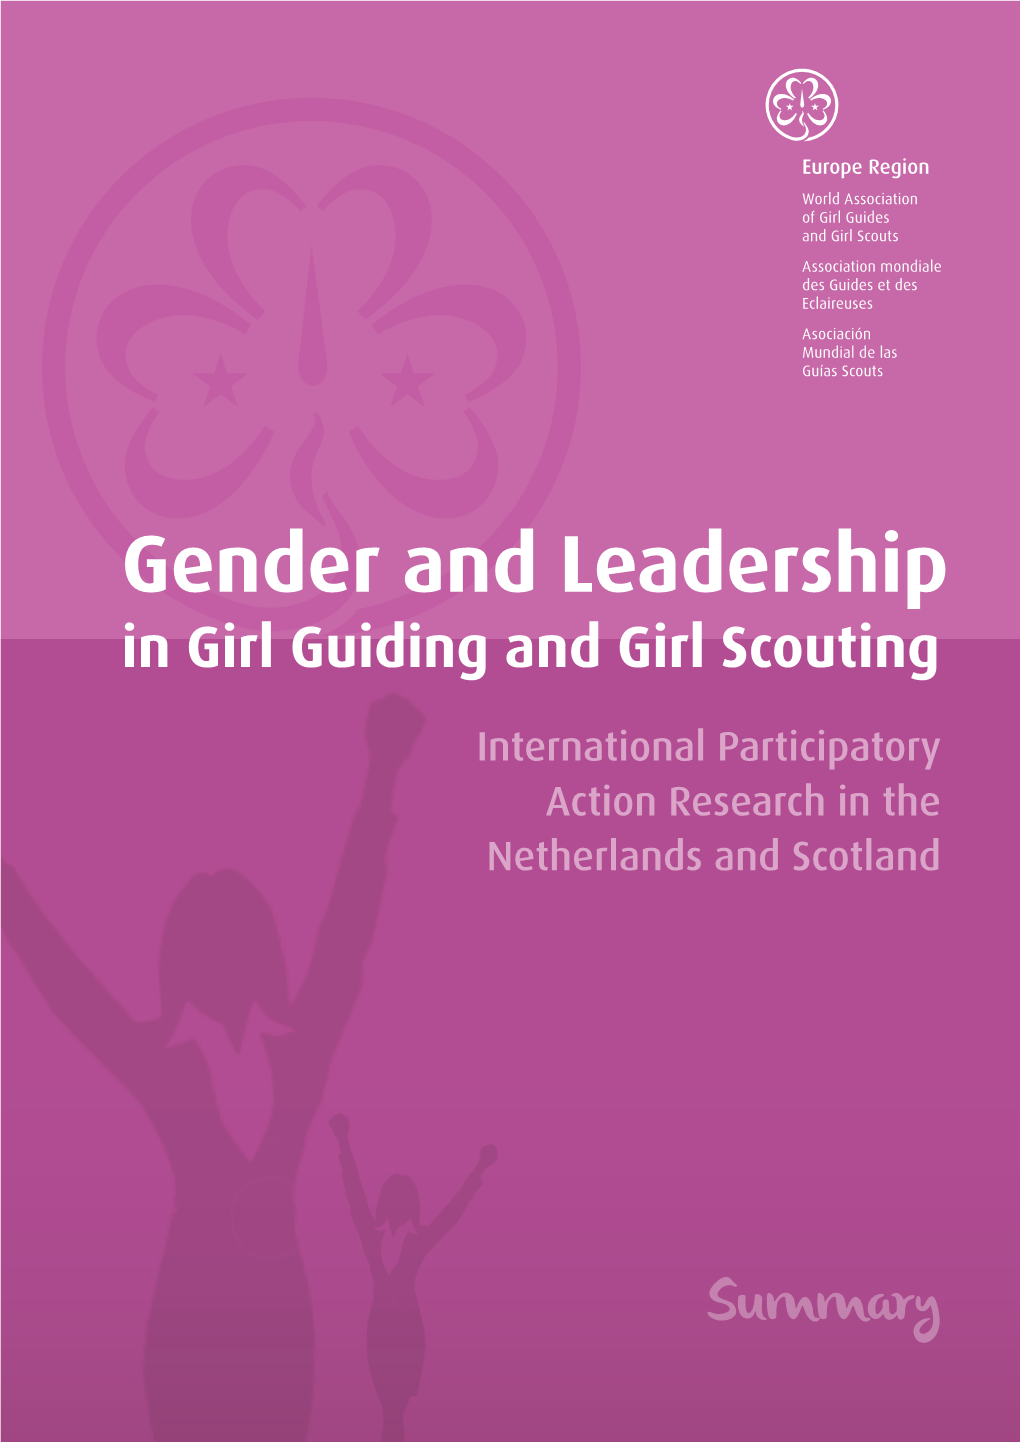 Gender and Leadership in Girl Guiding and Girl Scouting